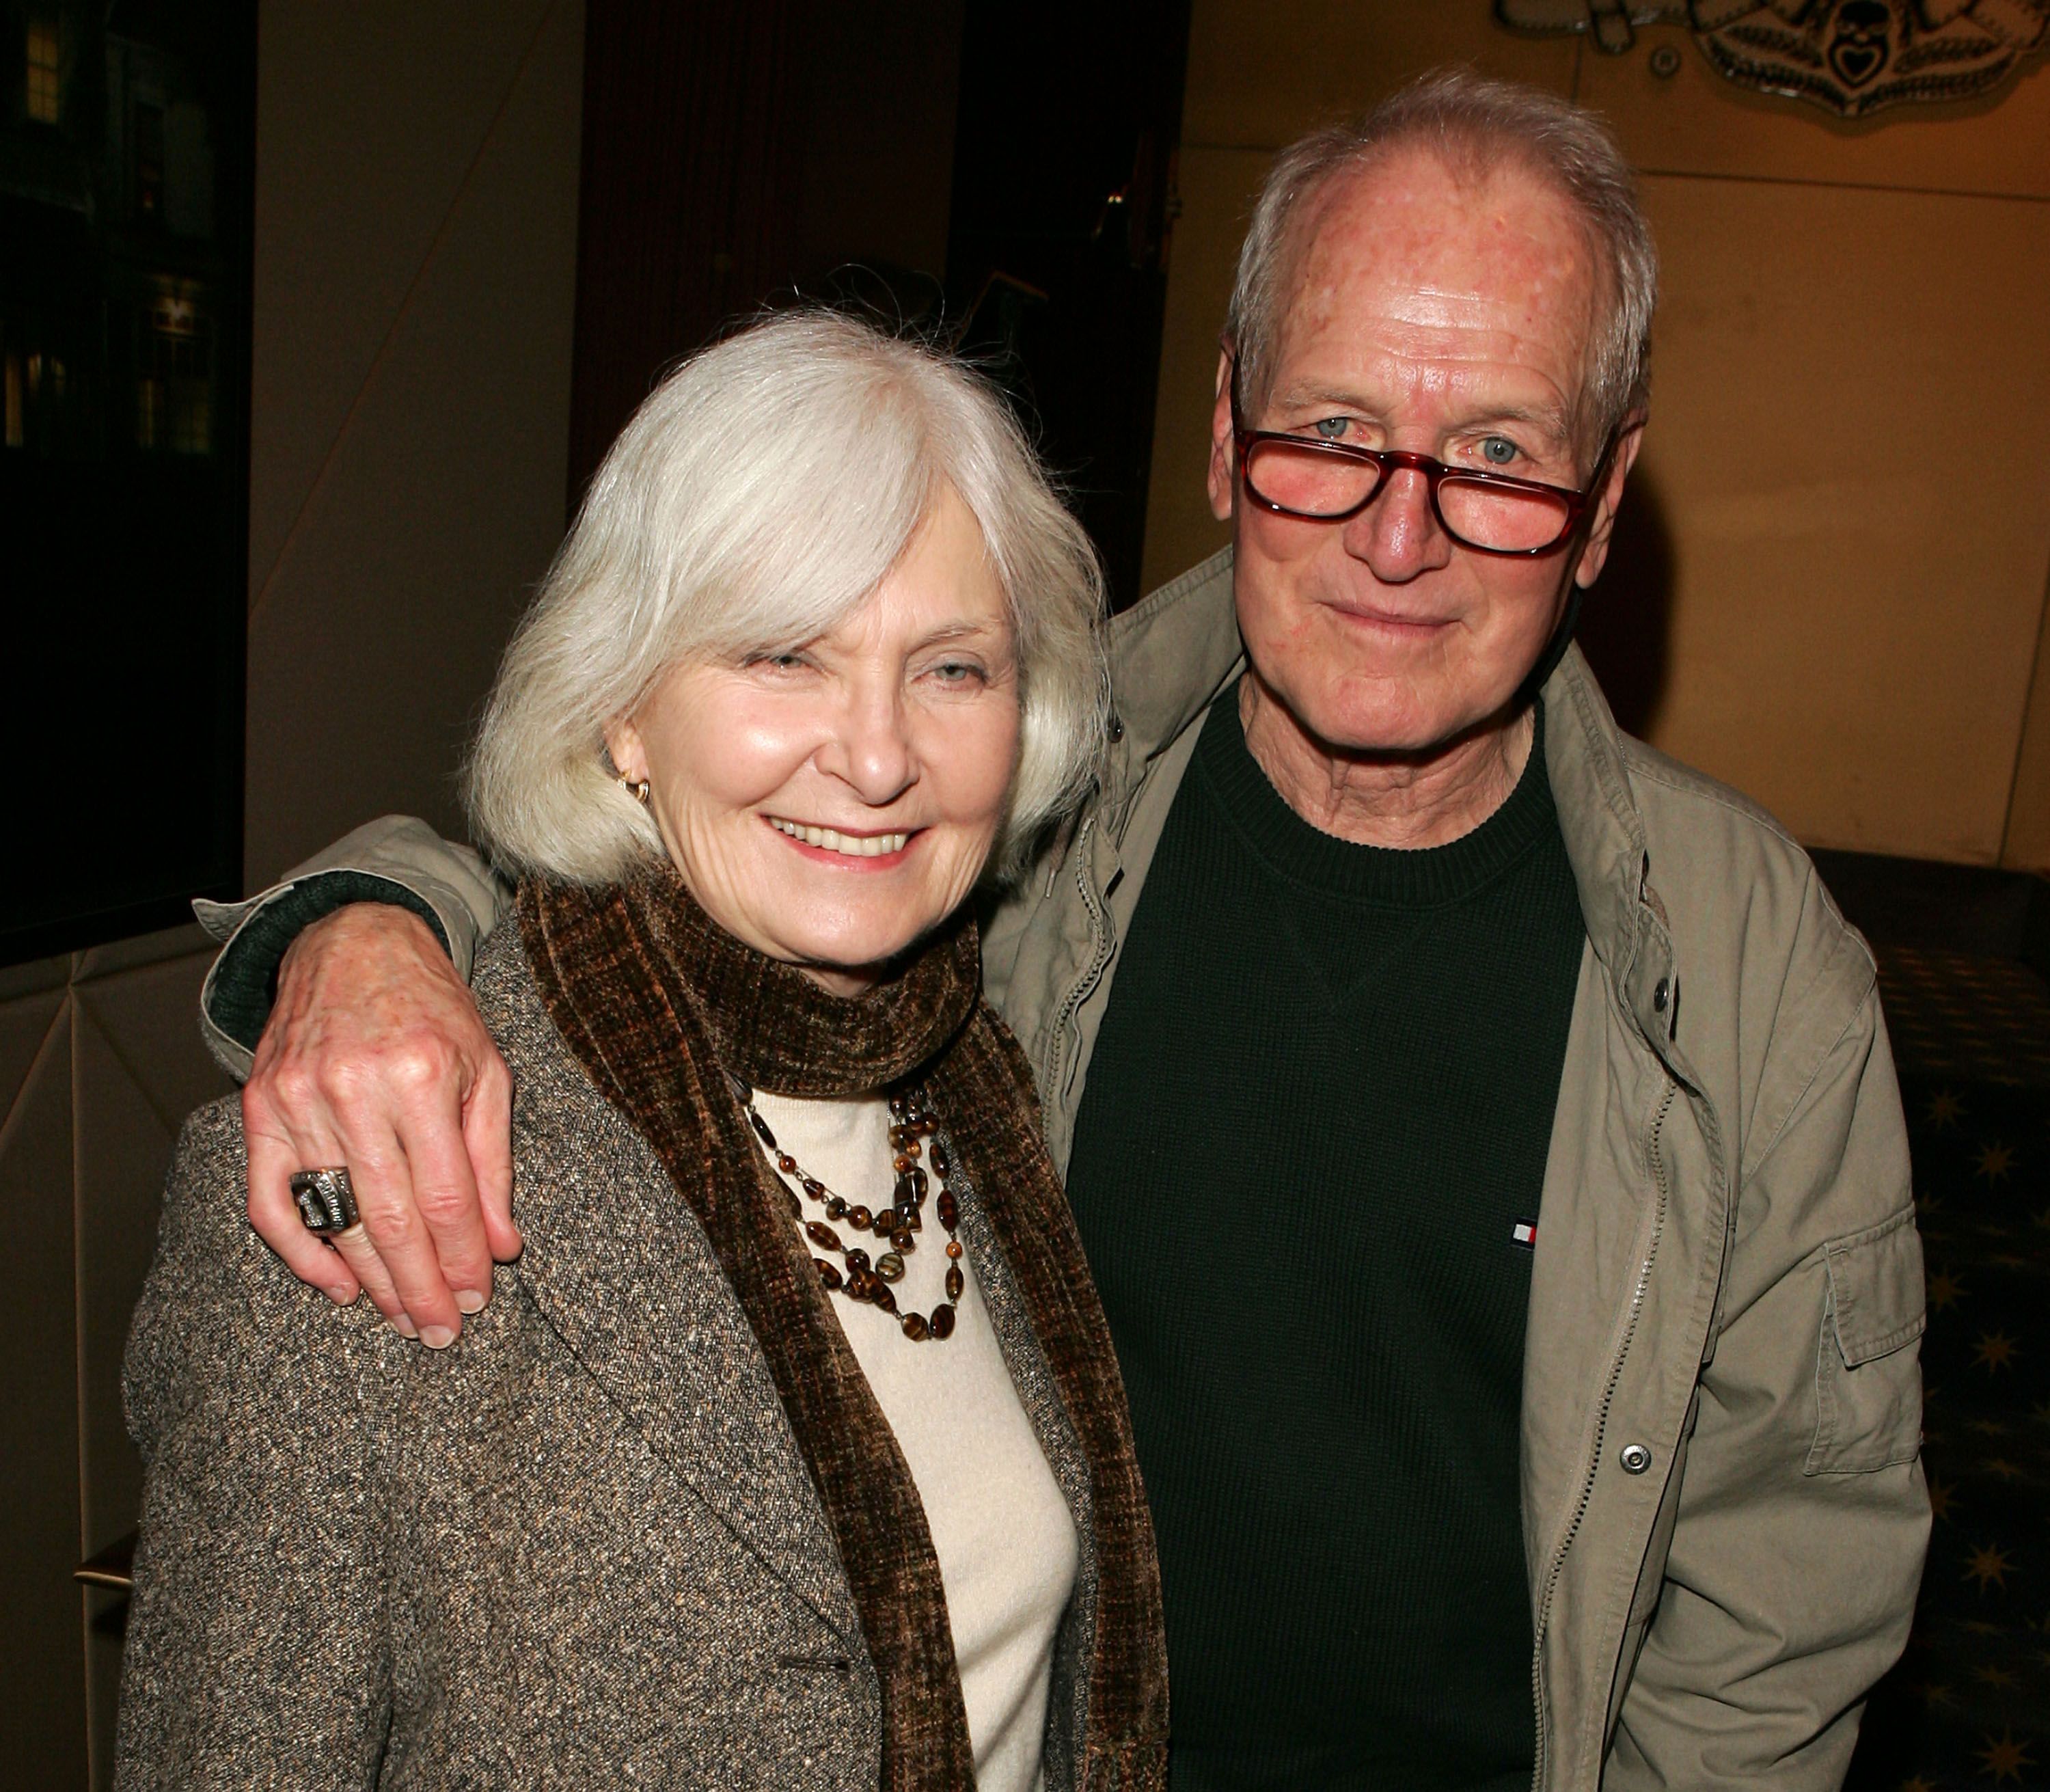 Joanne Woodward and Paul Newman during the special screening of "The Woodsman" on January 10, 2004 in New York City. | Source: Getty Images